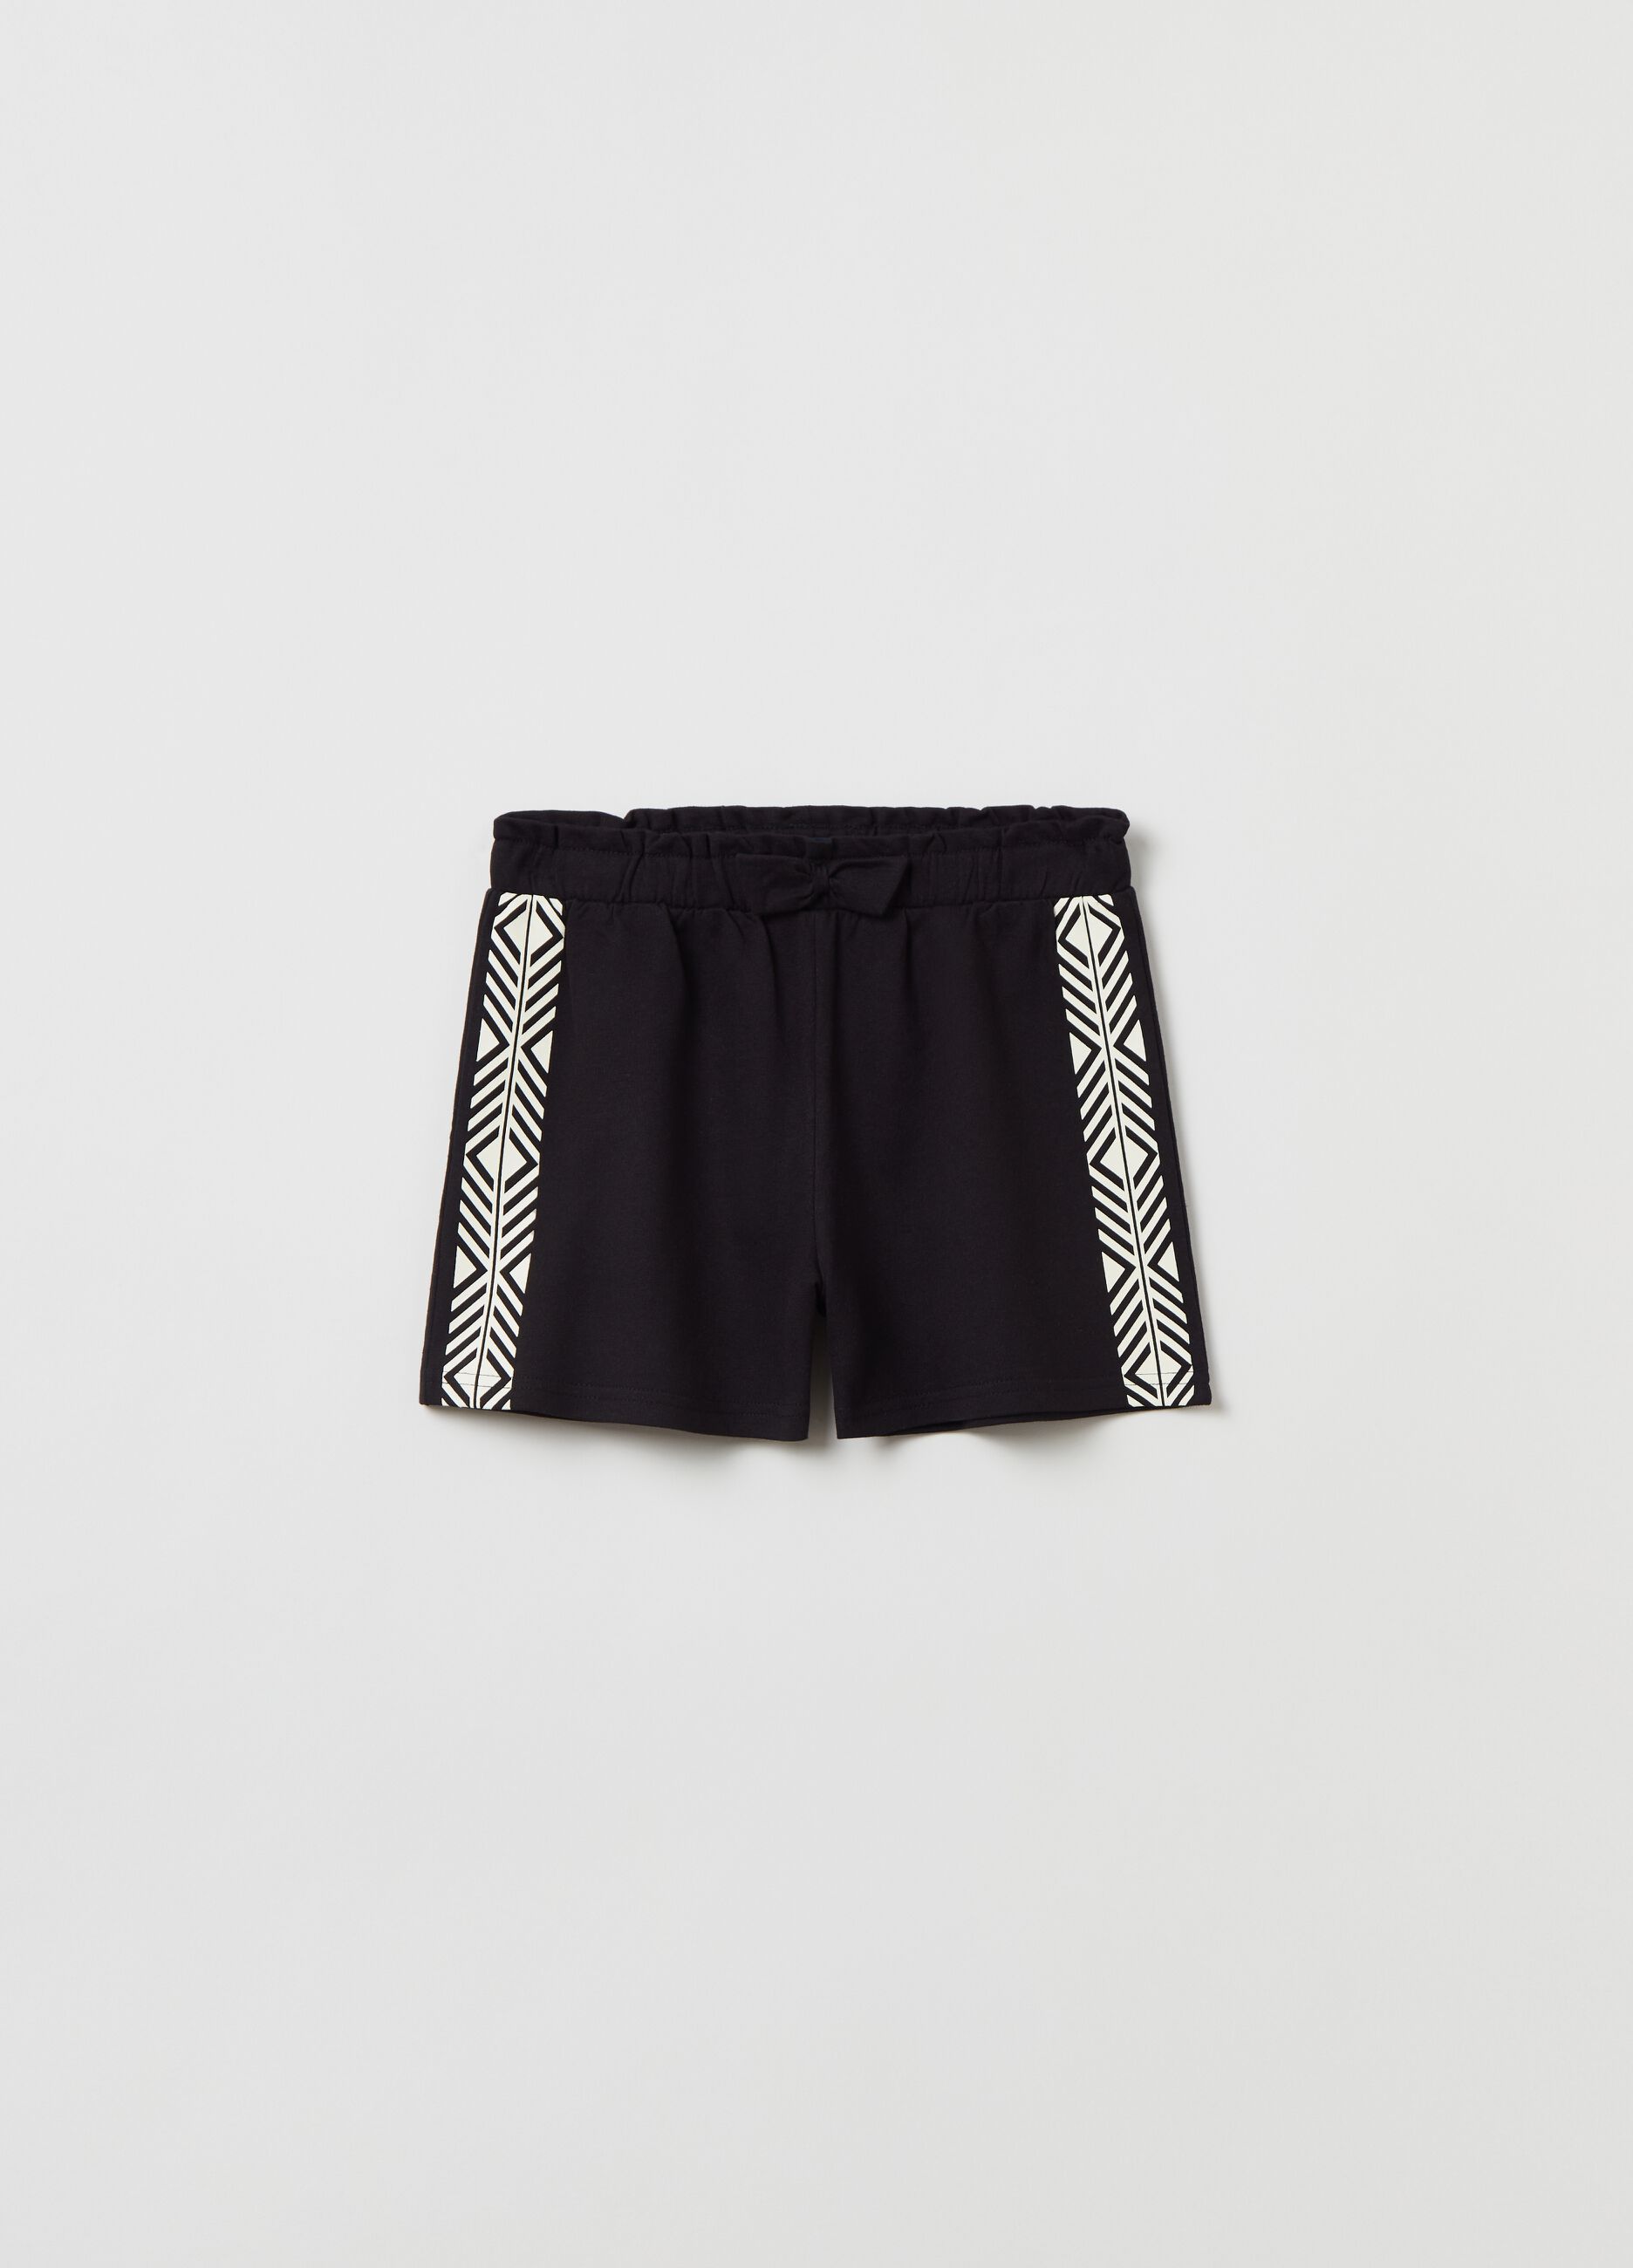 French terry shorts with contrasting bands